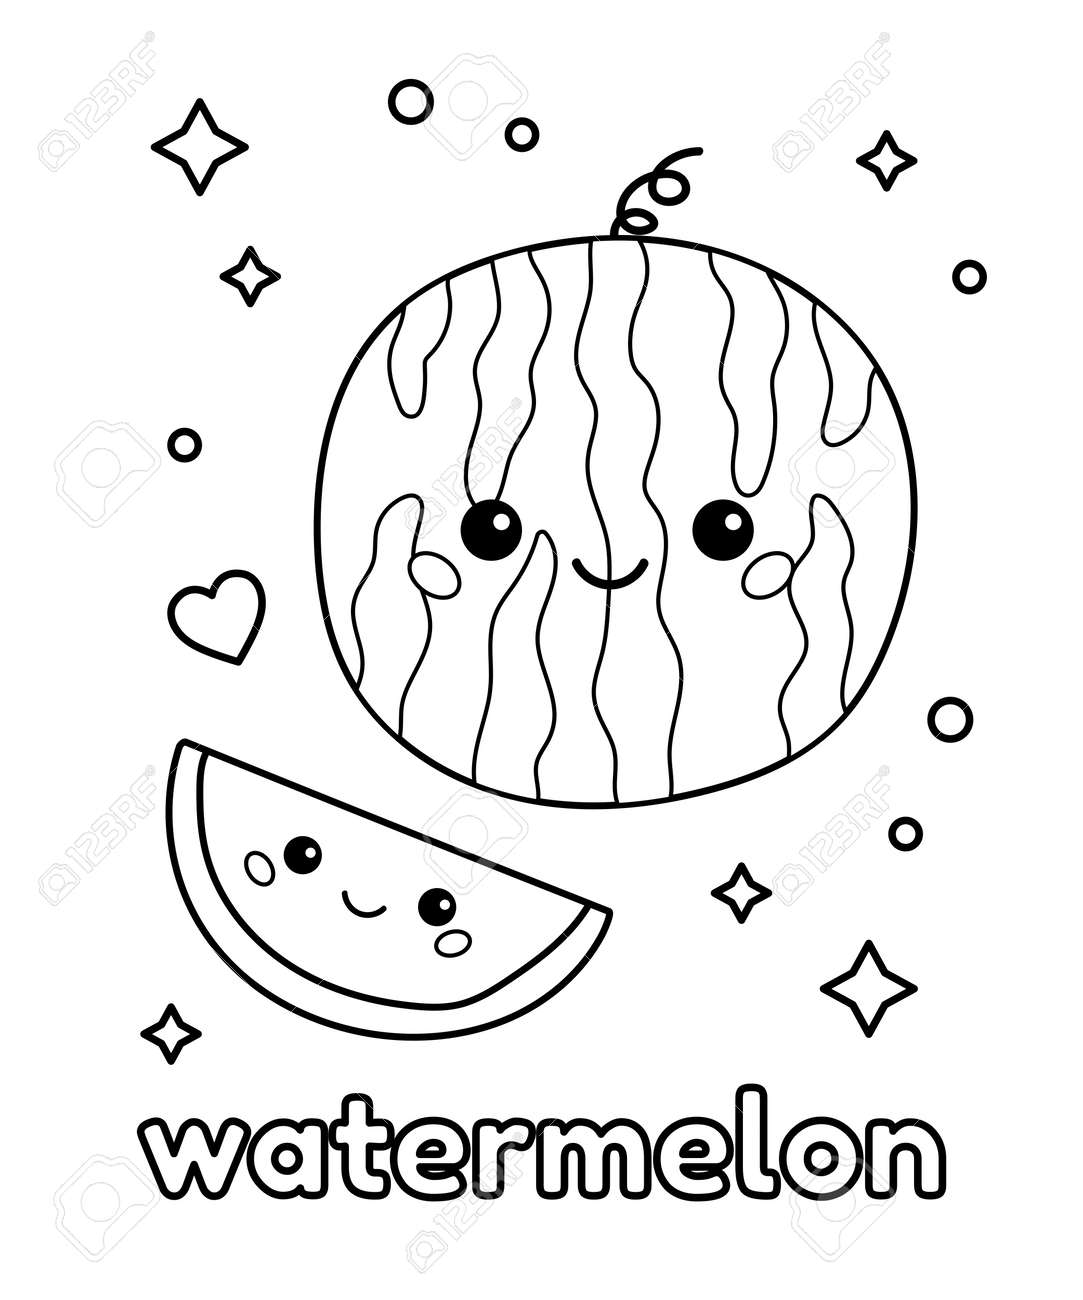 Healthy kawaii food cute cartoon watermelon with face coloring page for preschool kids vector outline illustration royalty free svg cliparts vectors and stock illustration image